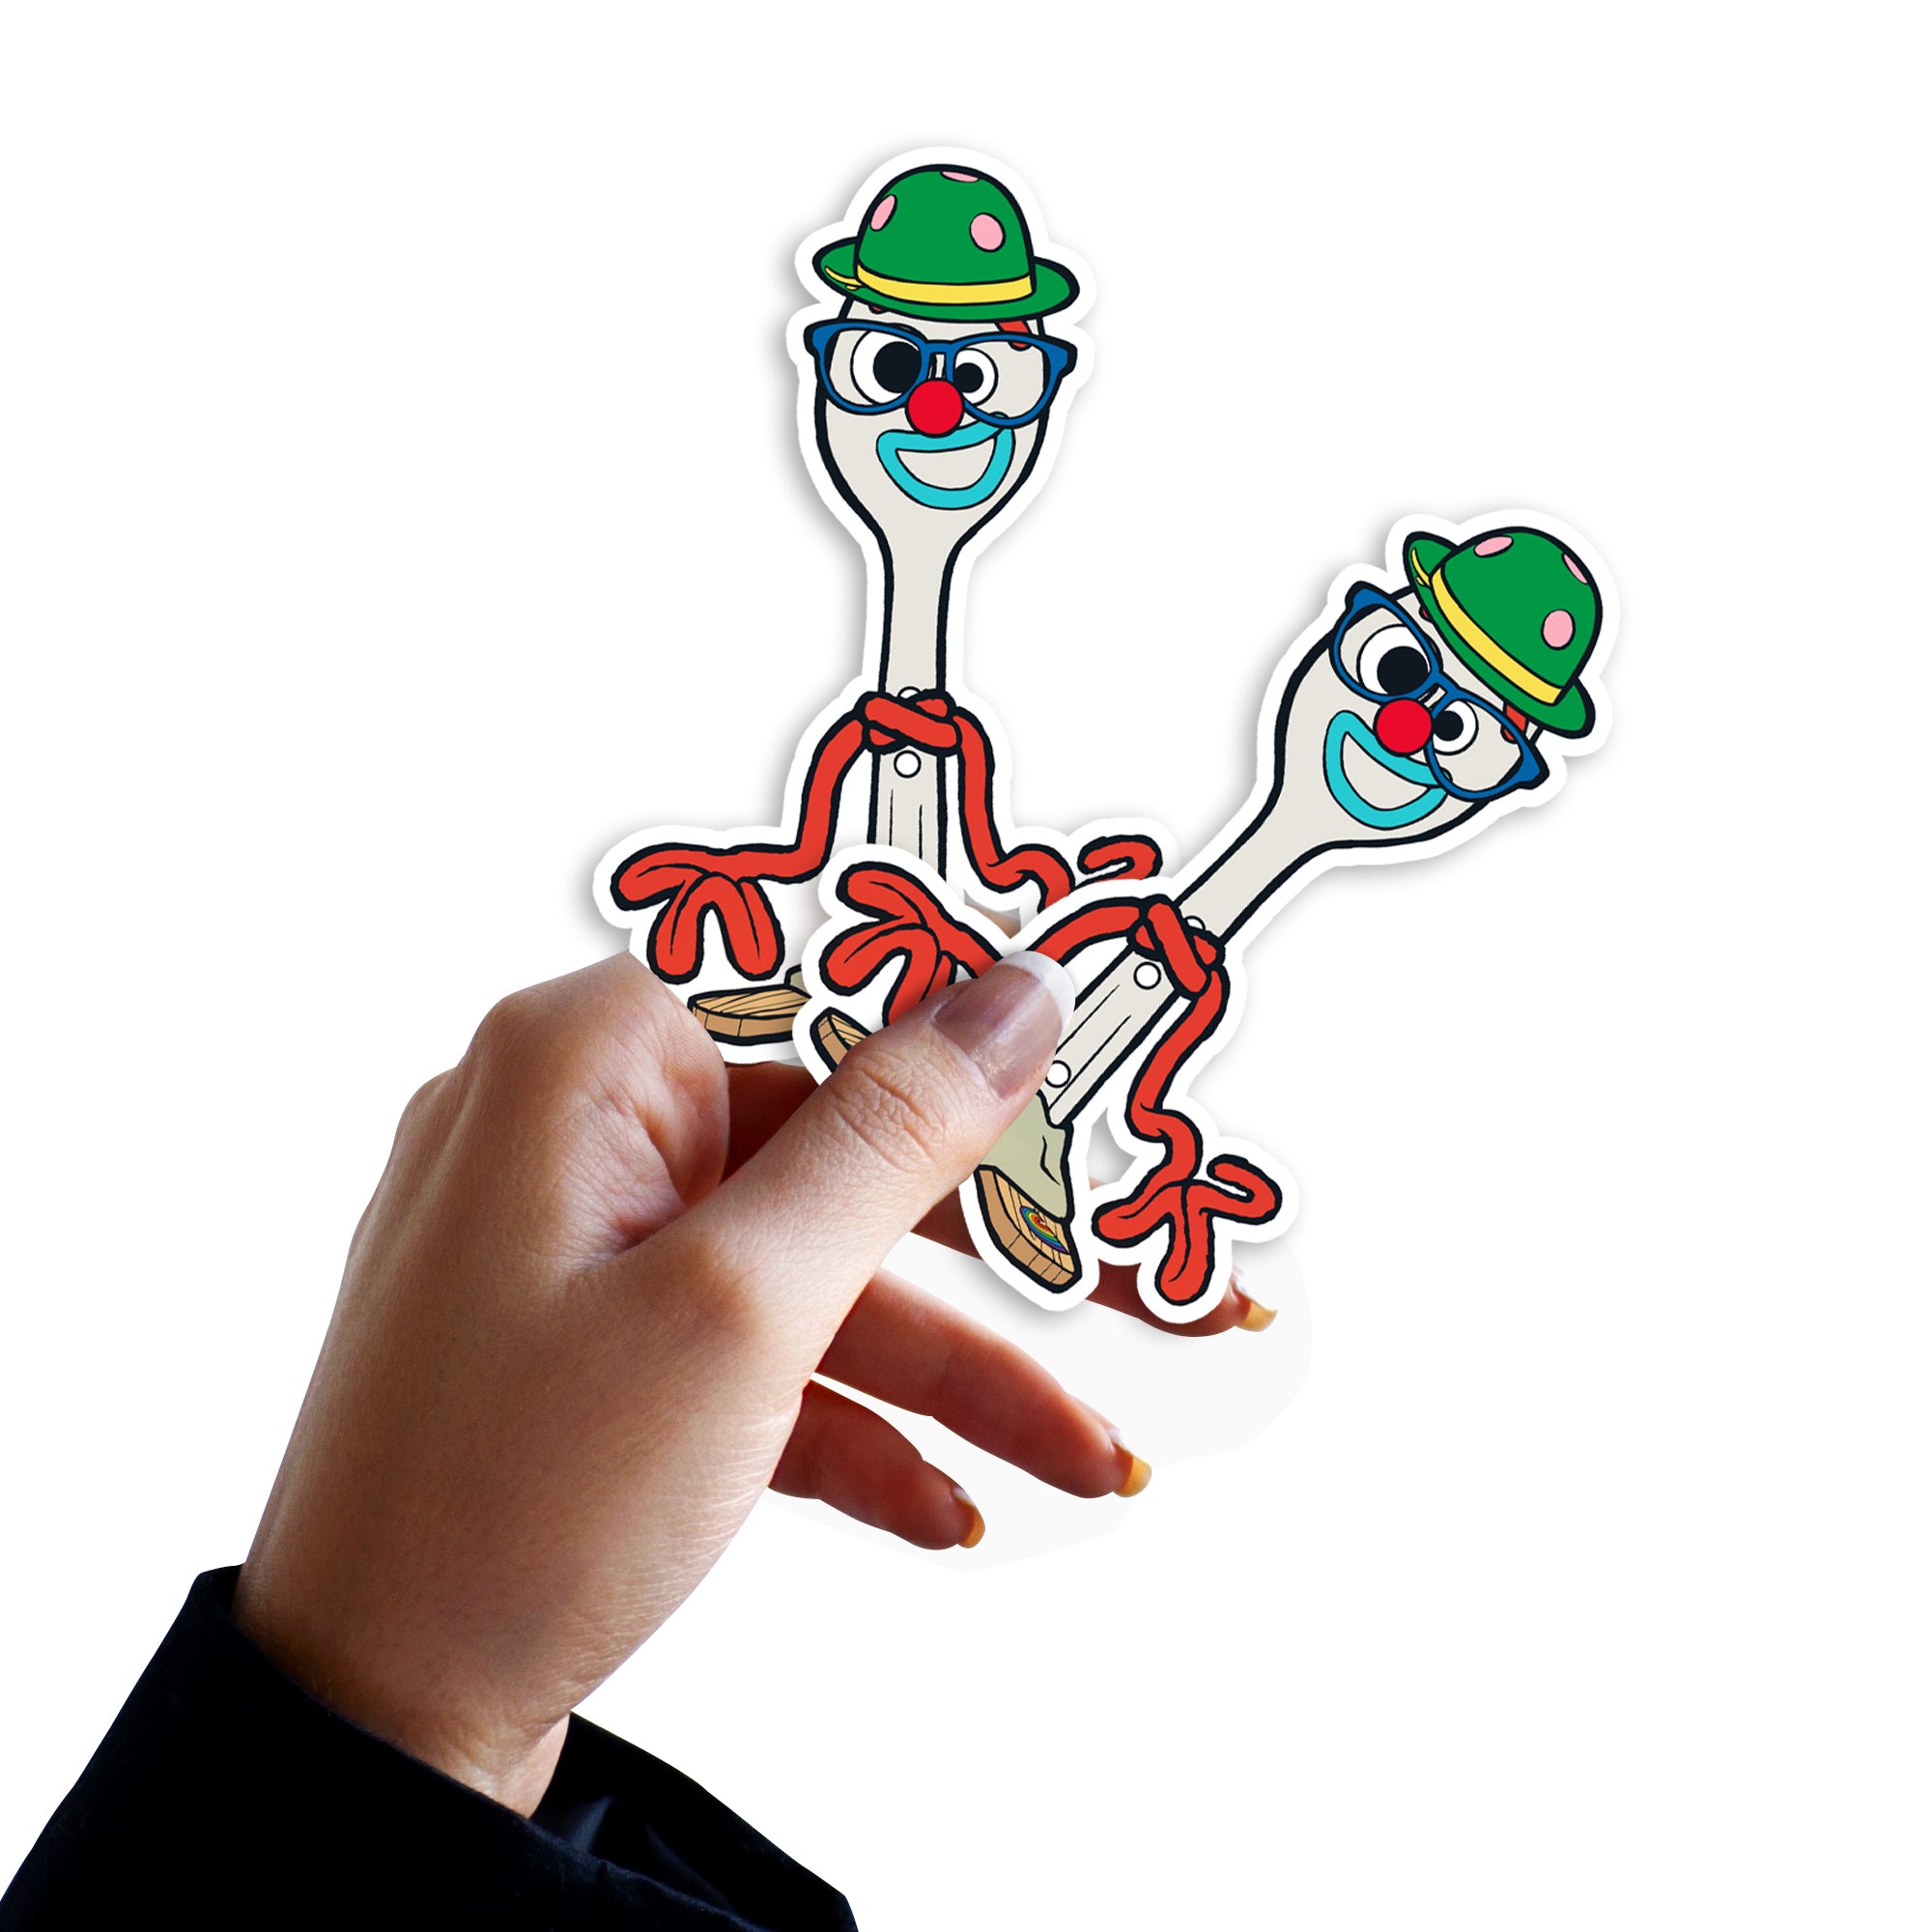 Sheet of 4 -Toy Story: Forky Minis - Officially Licensed Disney Remova –  Fathead